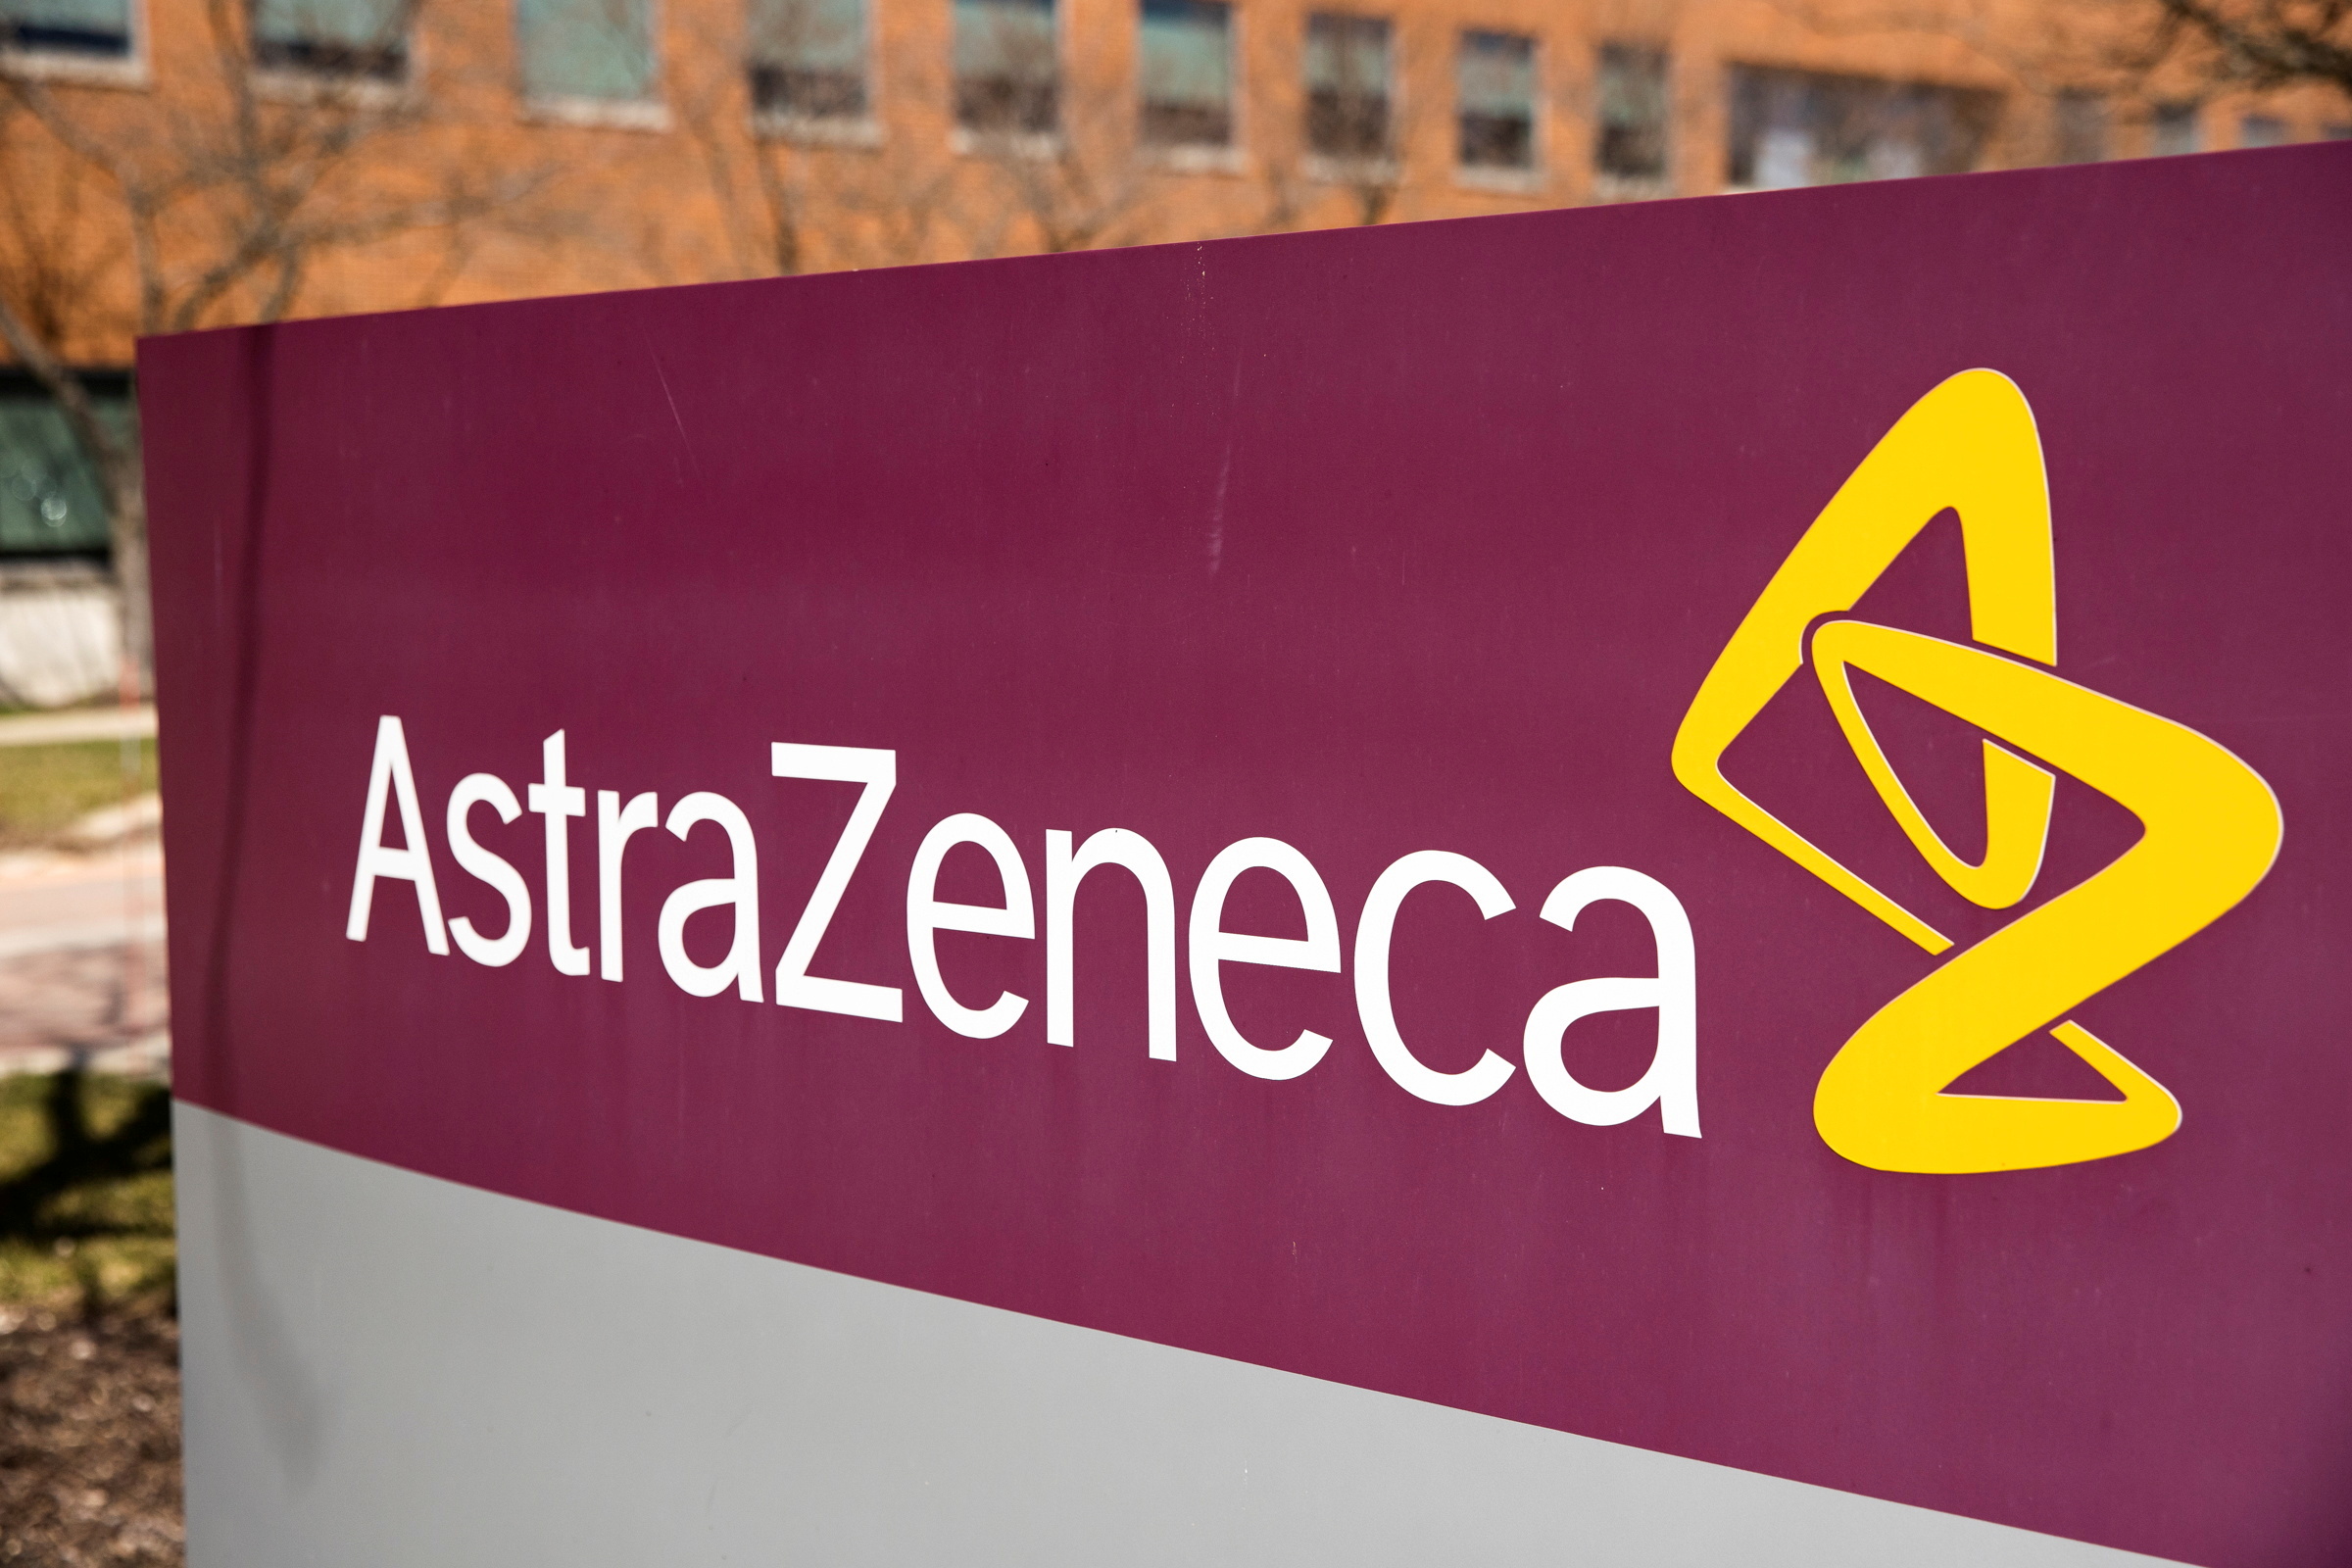 EXCLUSIVE AstraZeneca exploring options for COVID-19 vaccine business - executive | Reuters